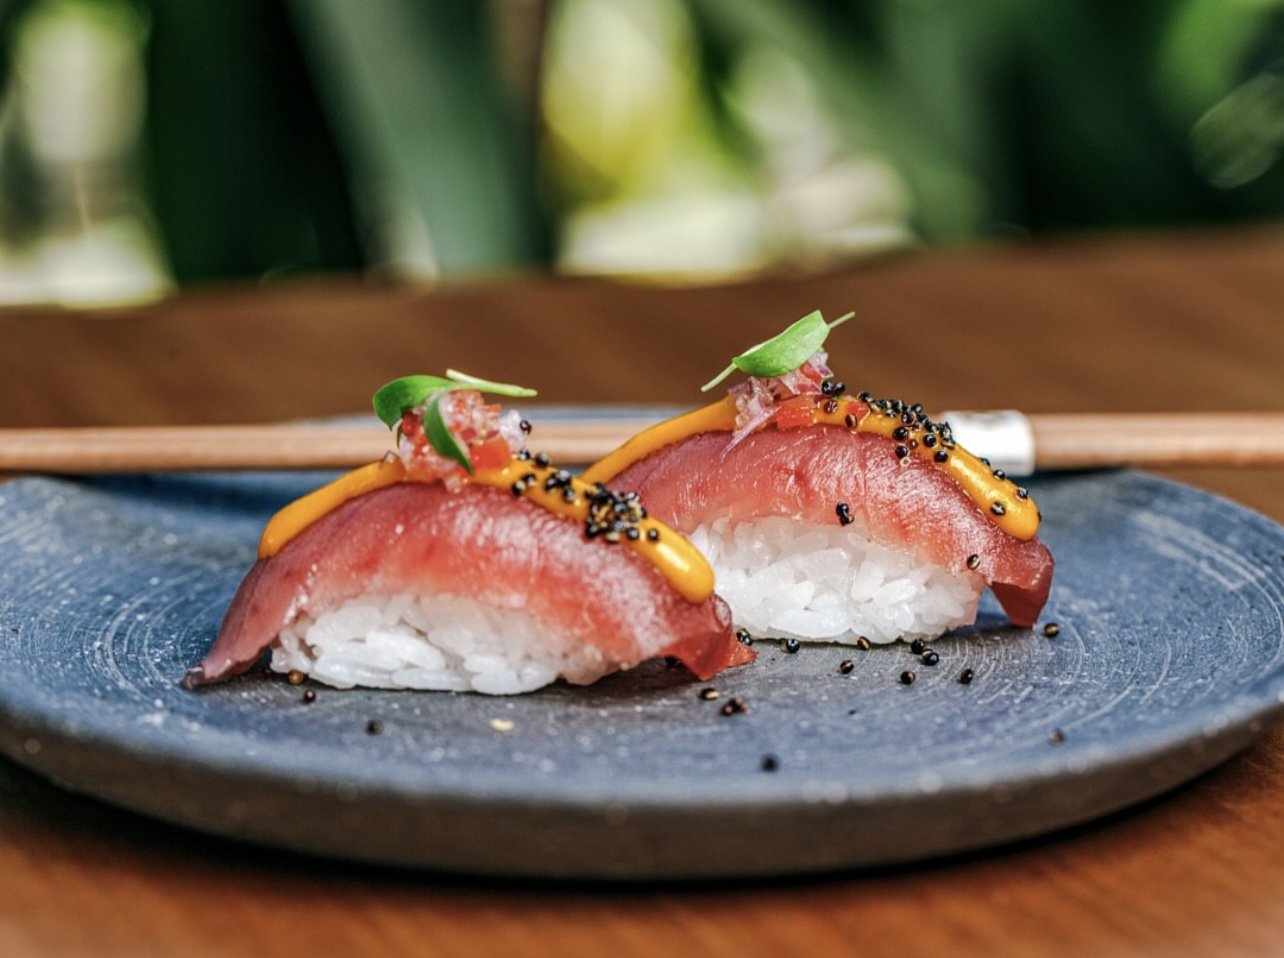 Miami's Top Nikkei Restaurants: A Fusion of Japanese and Peruvian Flavors